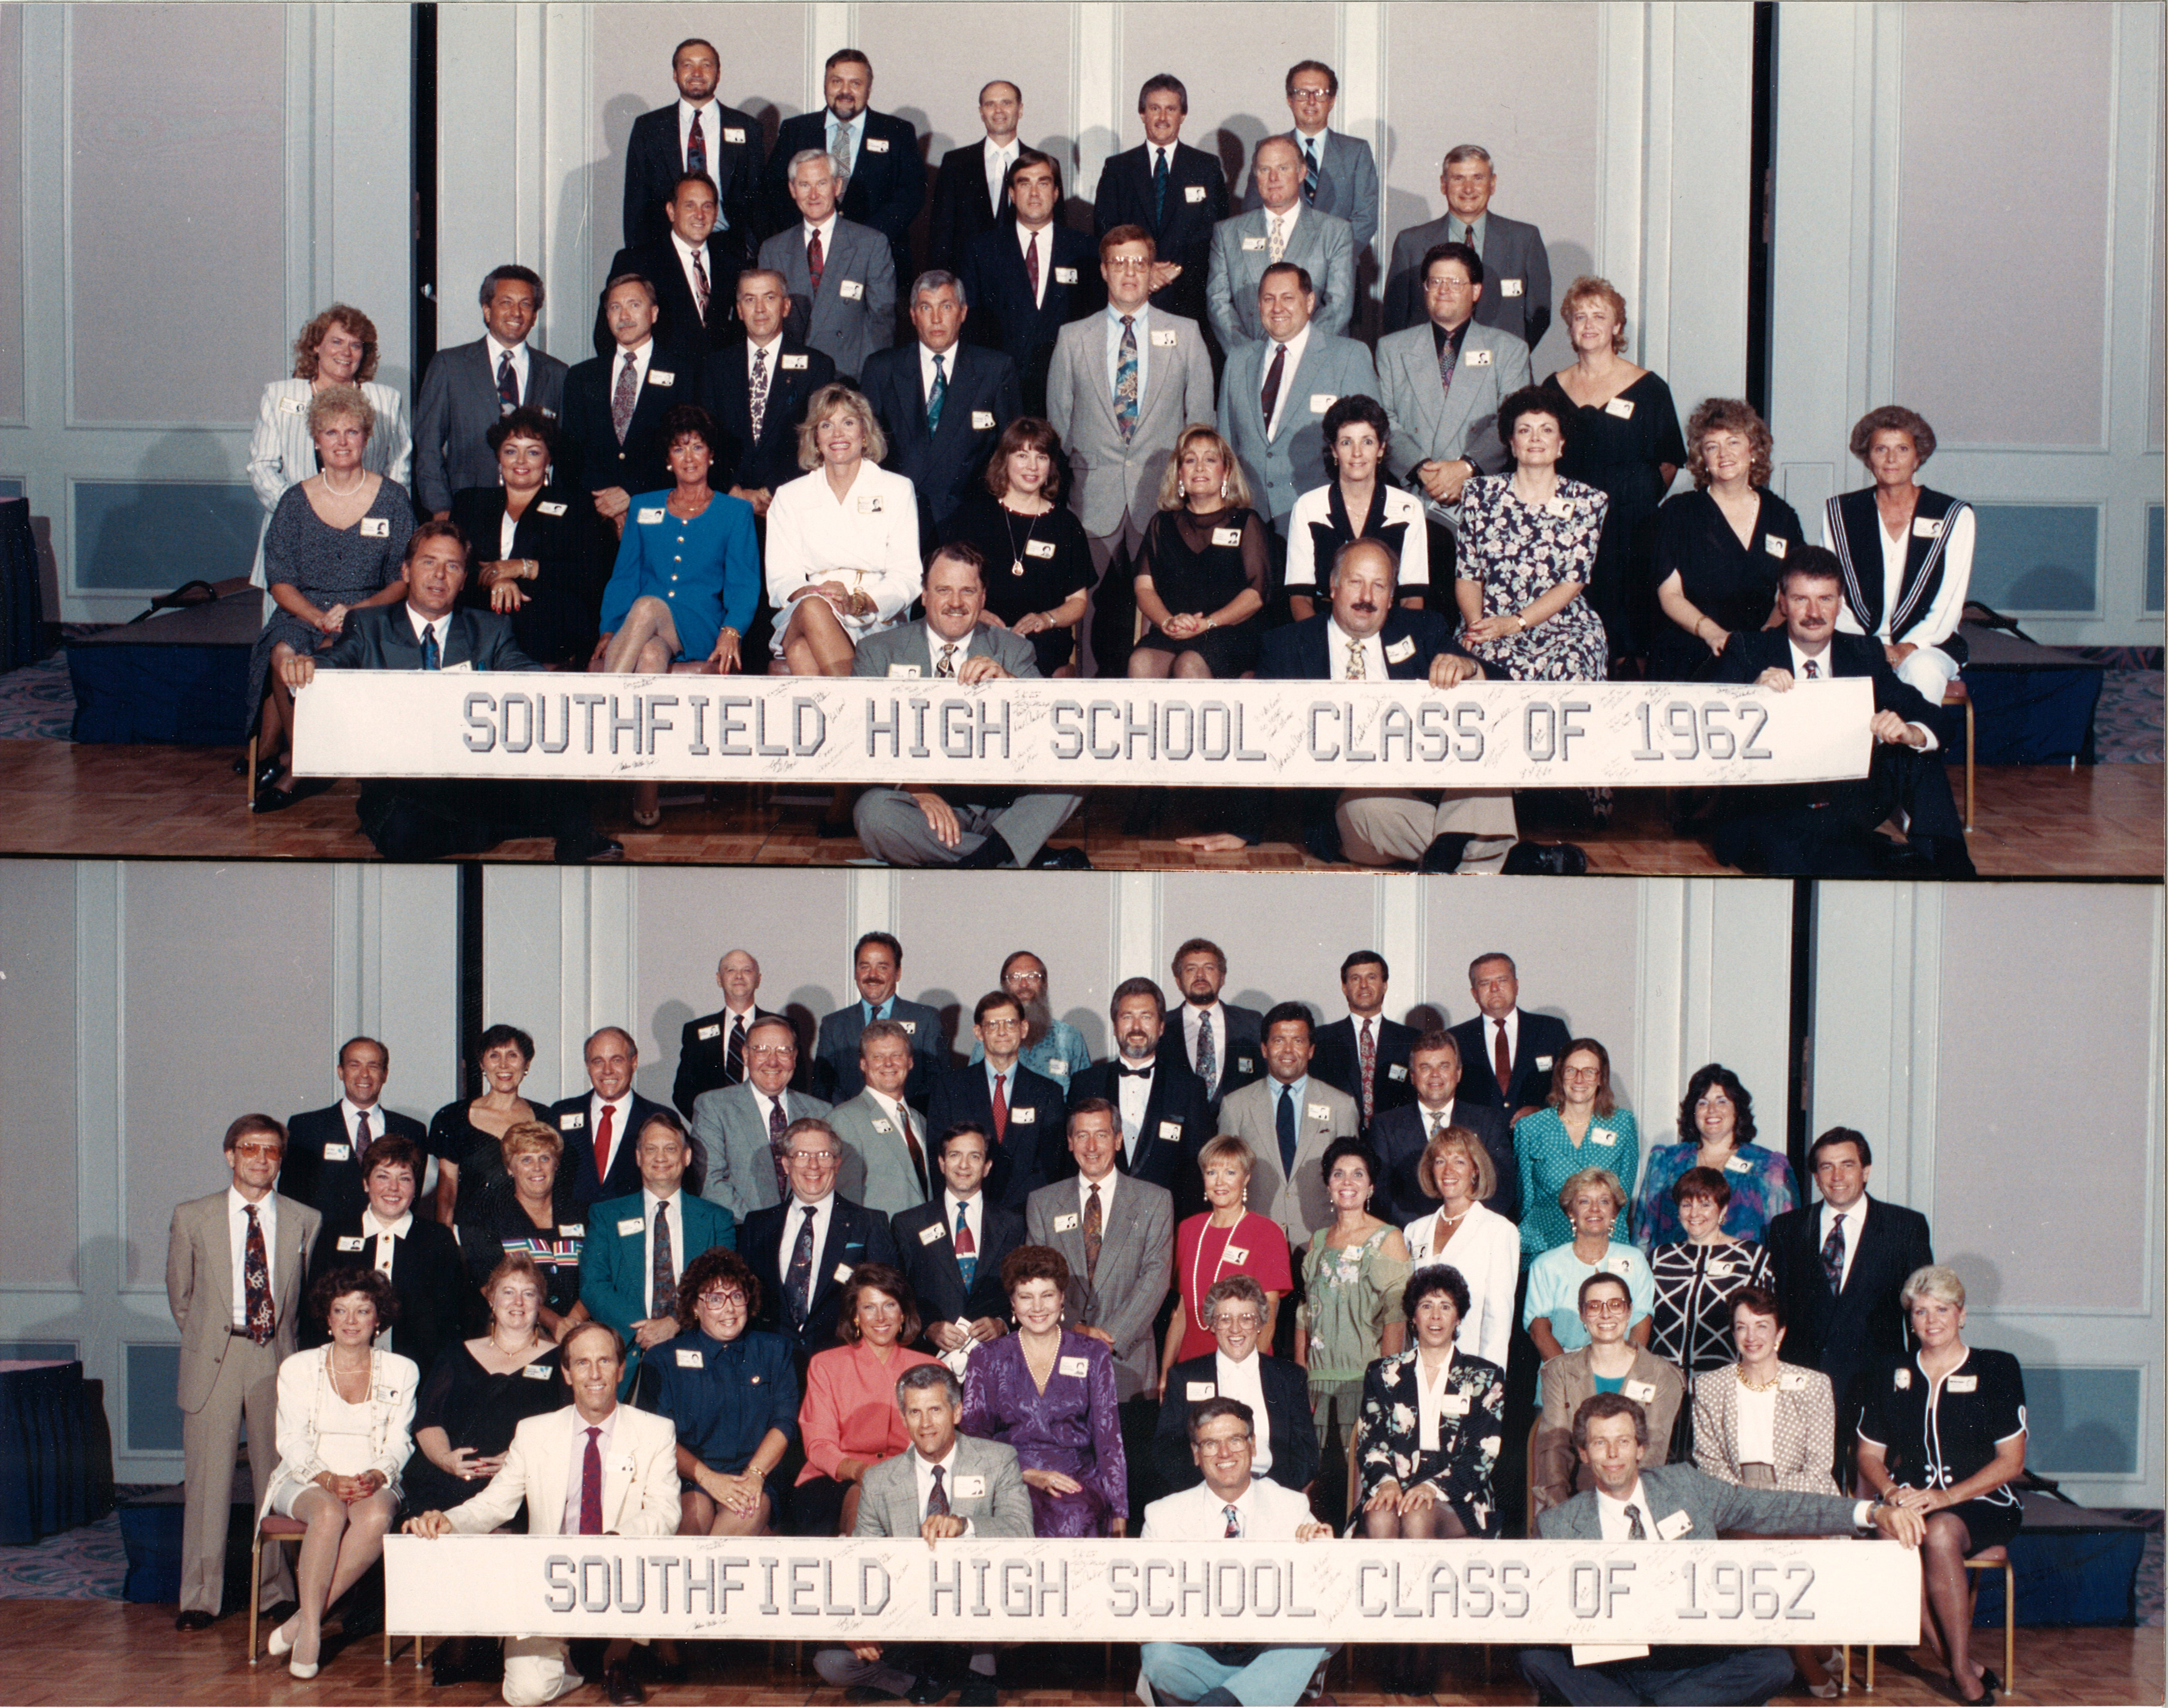 1992 30 Year Reunion --
Will you be in the 50 Year Reunion picture?